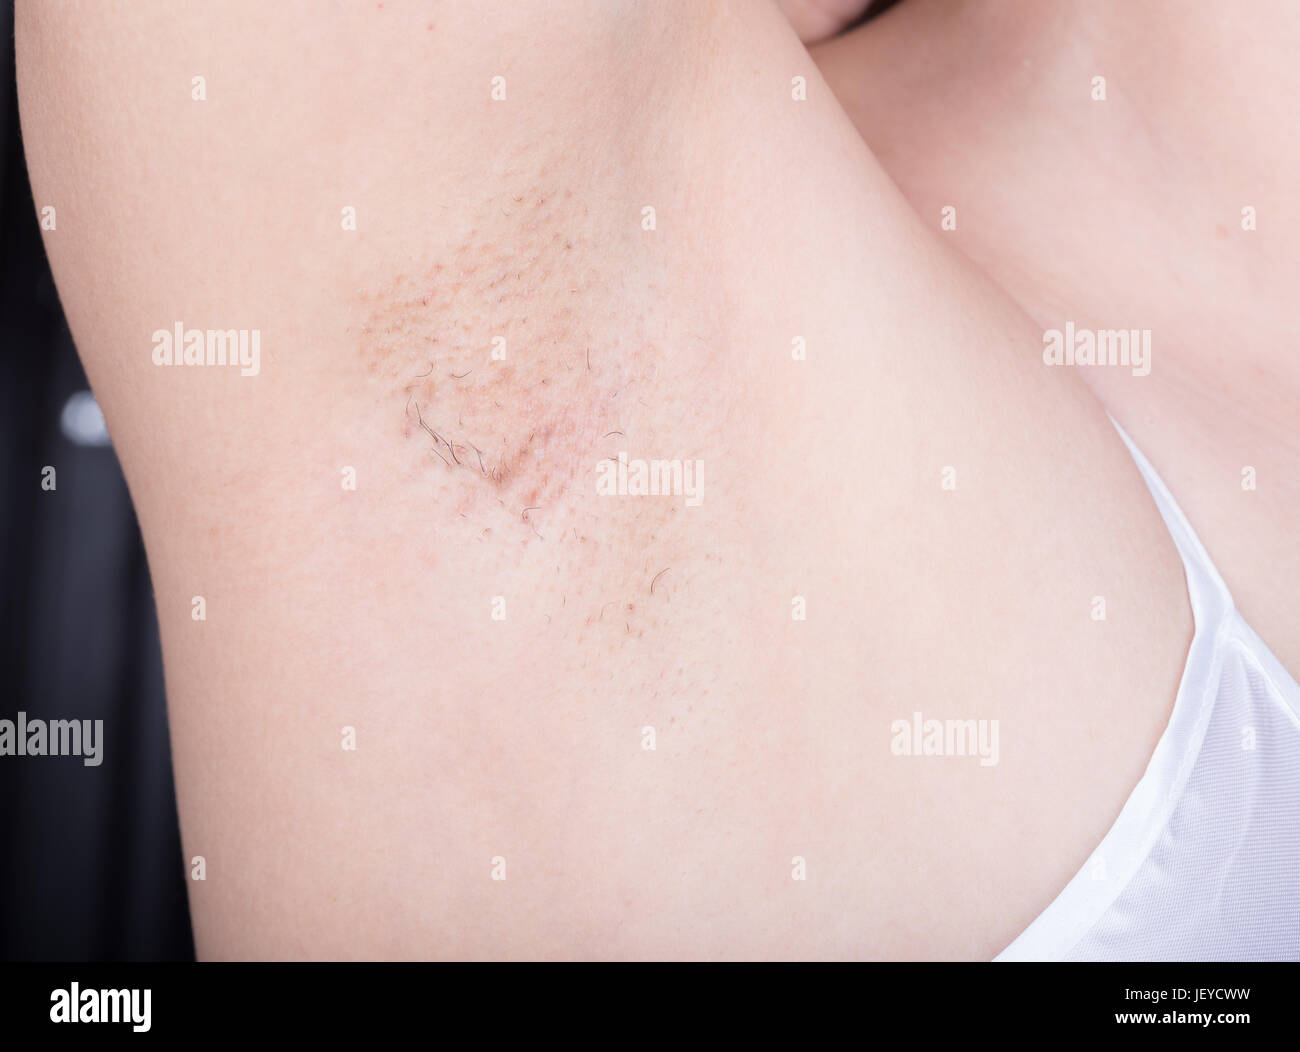 armpit of woman with grown hair Stock Photo